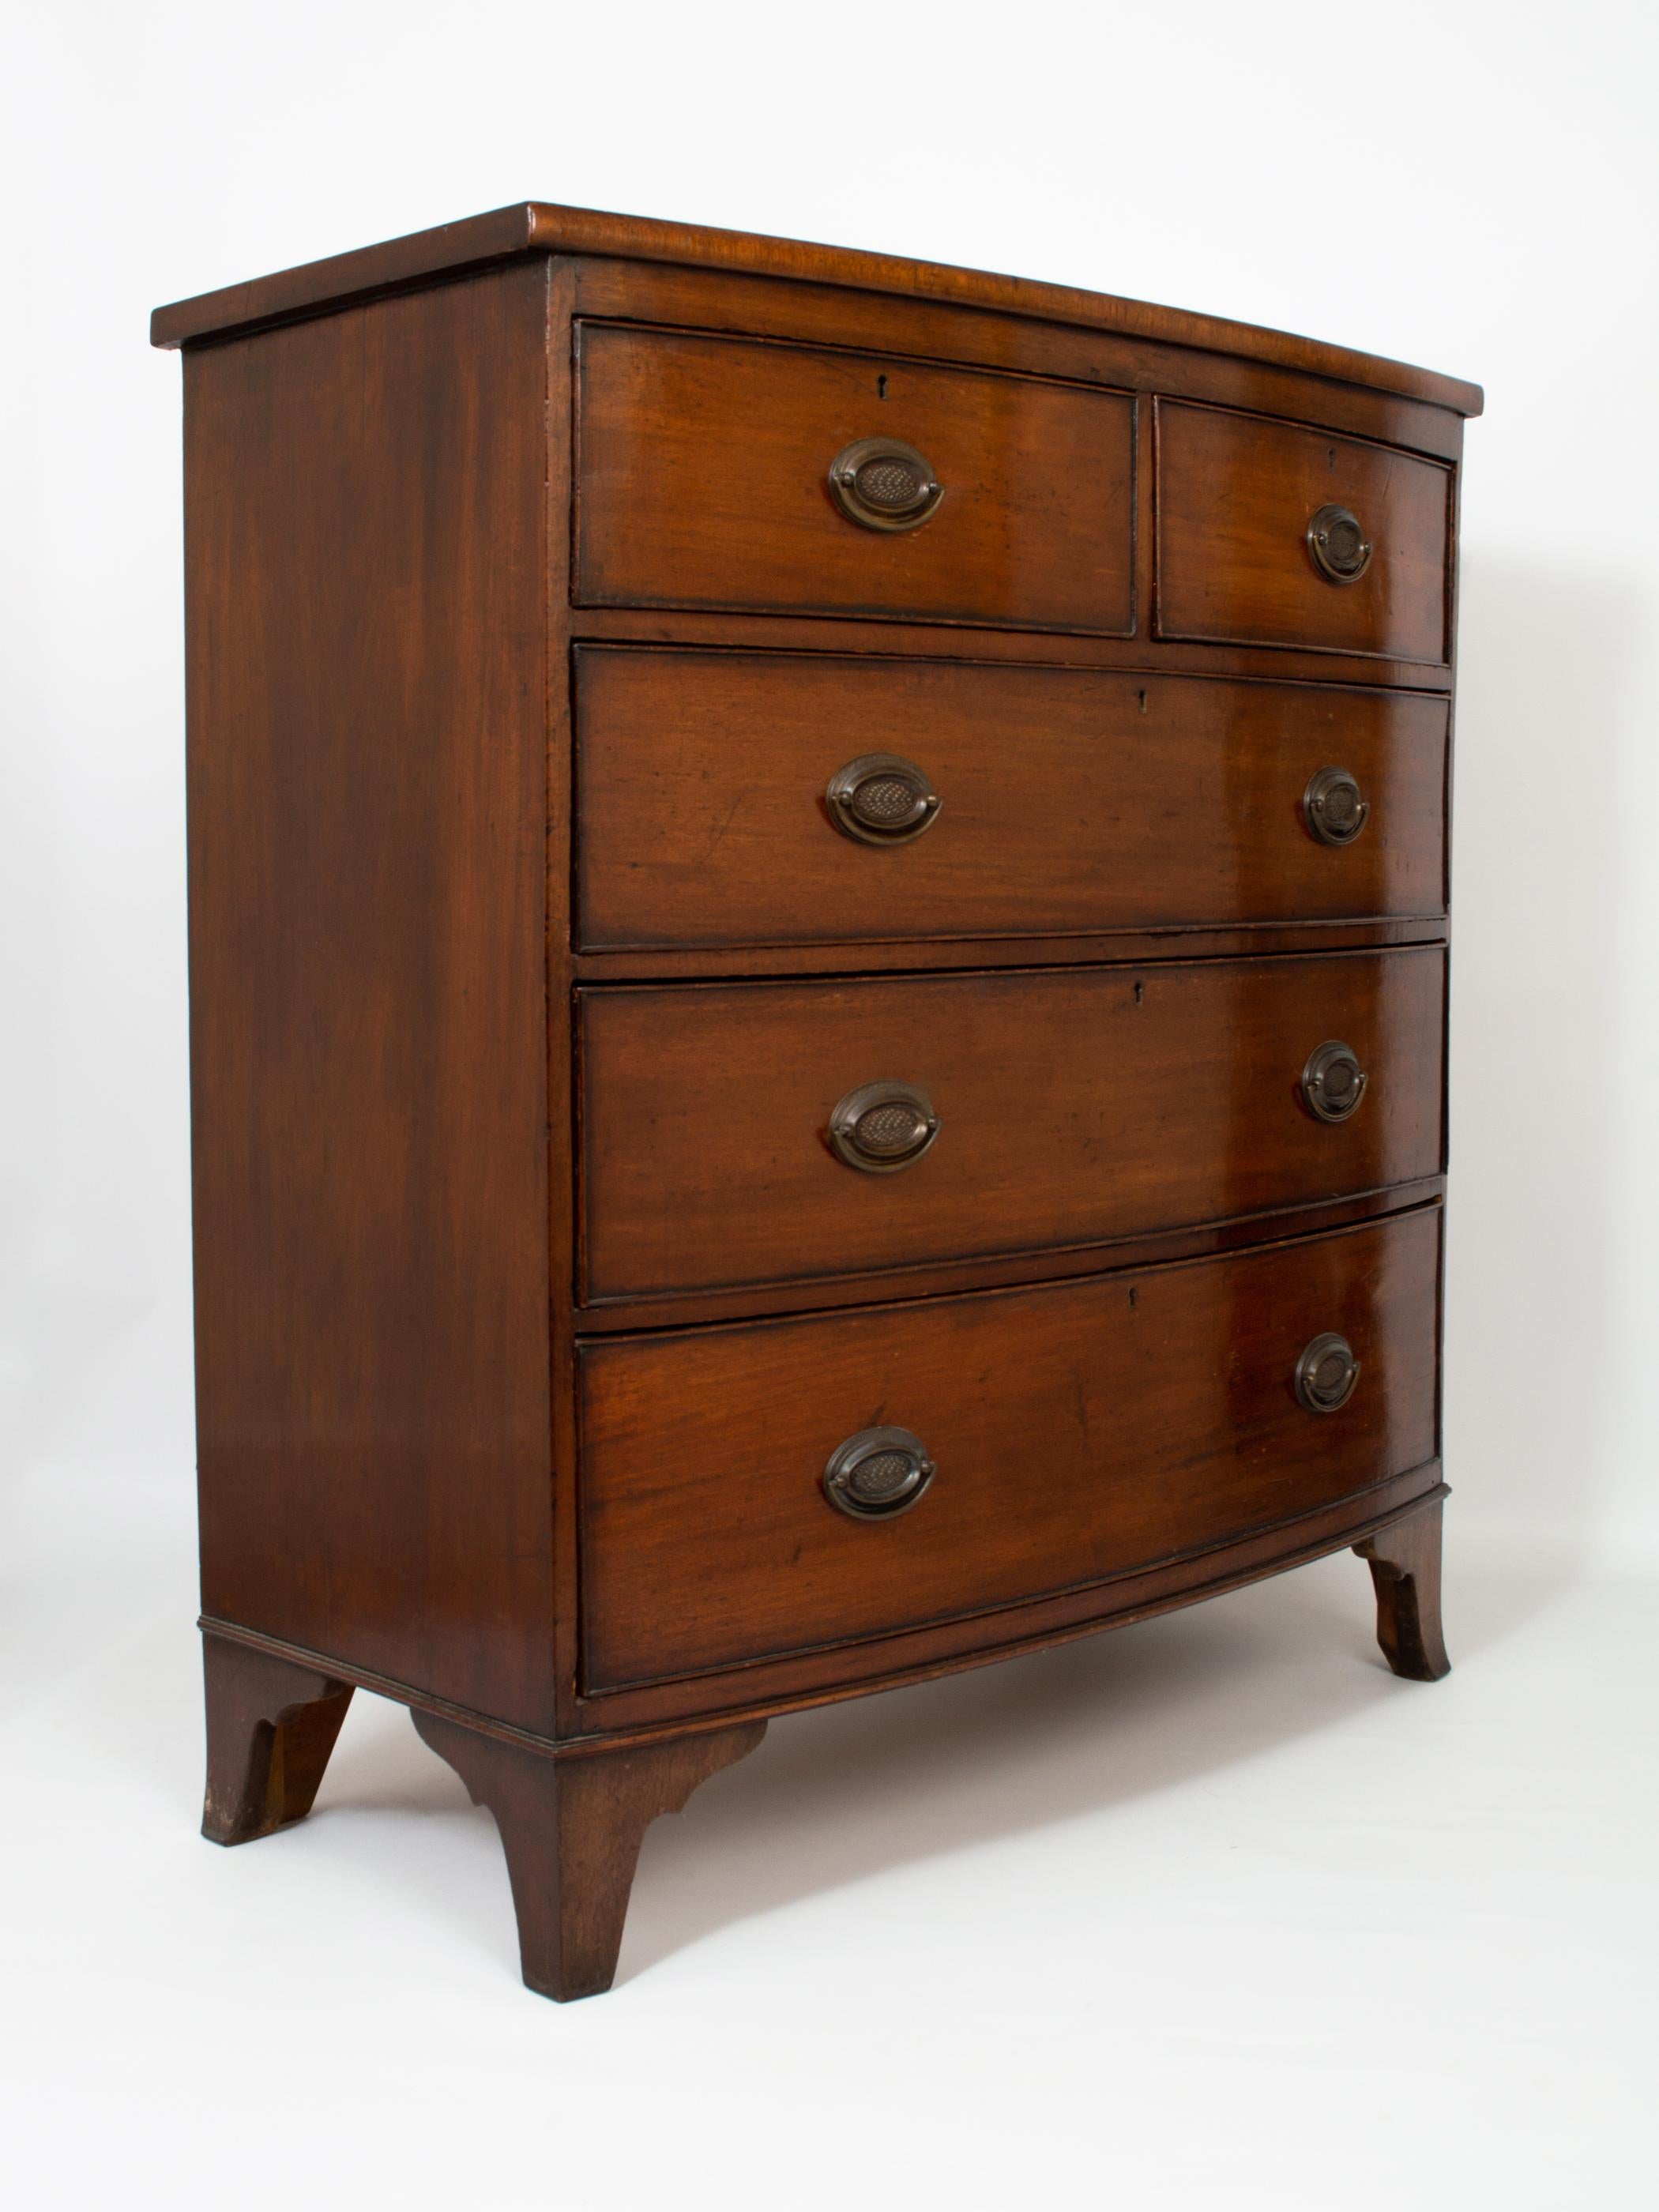 An antique English George III Mahogany bow fronted chest of drawers.
Made in England, dating from C.1800.
Fine quality piece on classic Georgian splayed bracket feet, and oval brass pull handles.